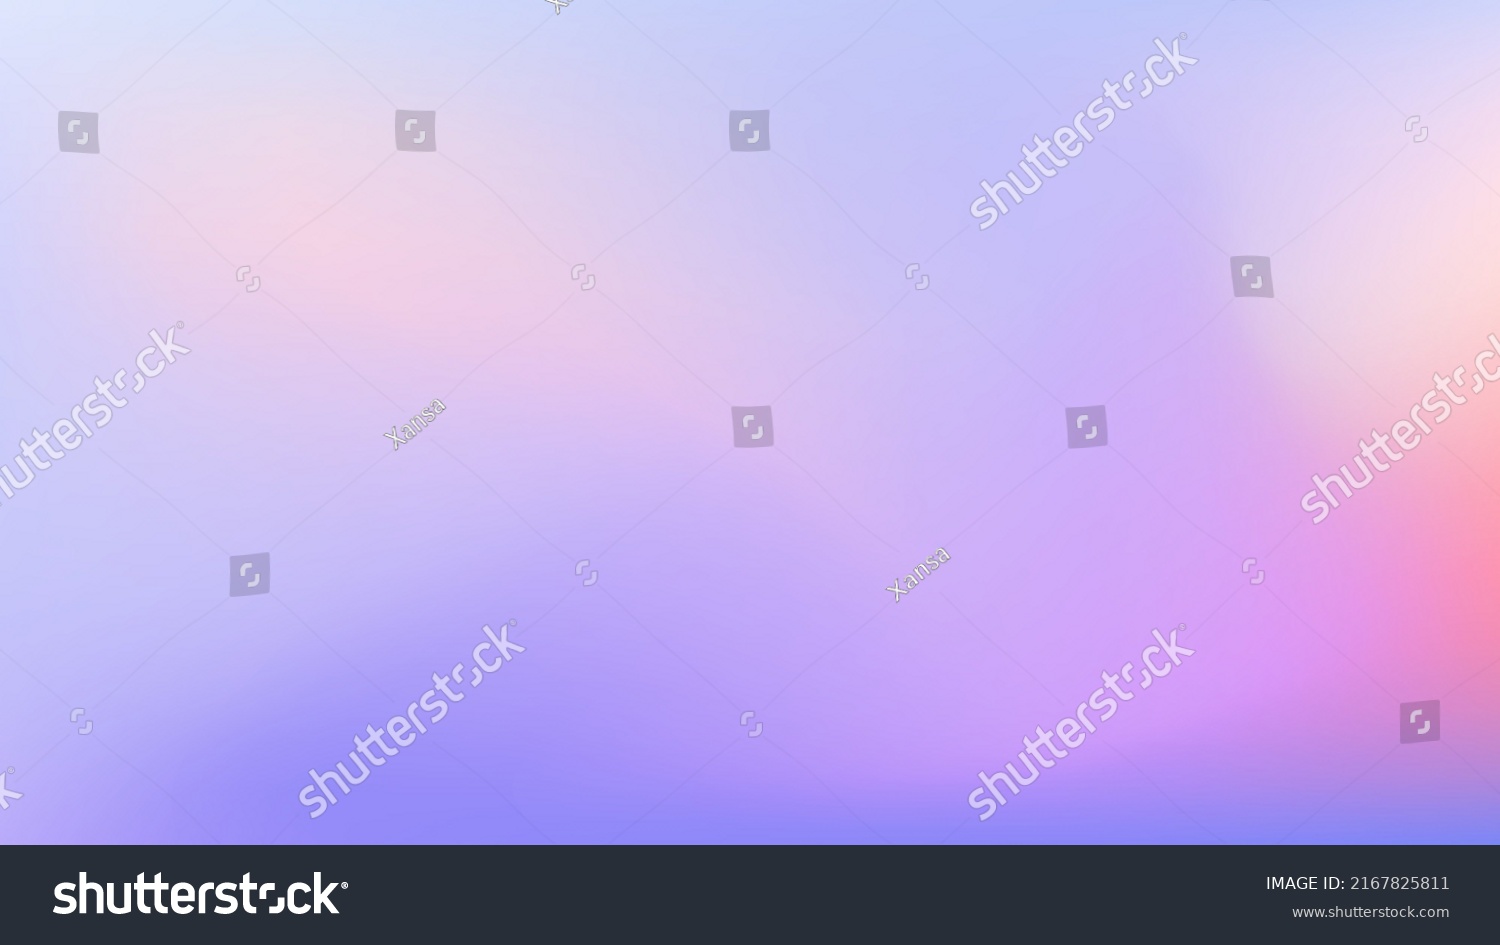 SVG of Abstract color vector banner. Blurred light fresh gradient background. Pastel pink, blue, lilac smooth spots. Neutral Liquid stains poster with place for your text. Vector gentle backdrop illustration svg